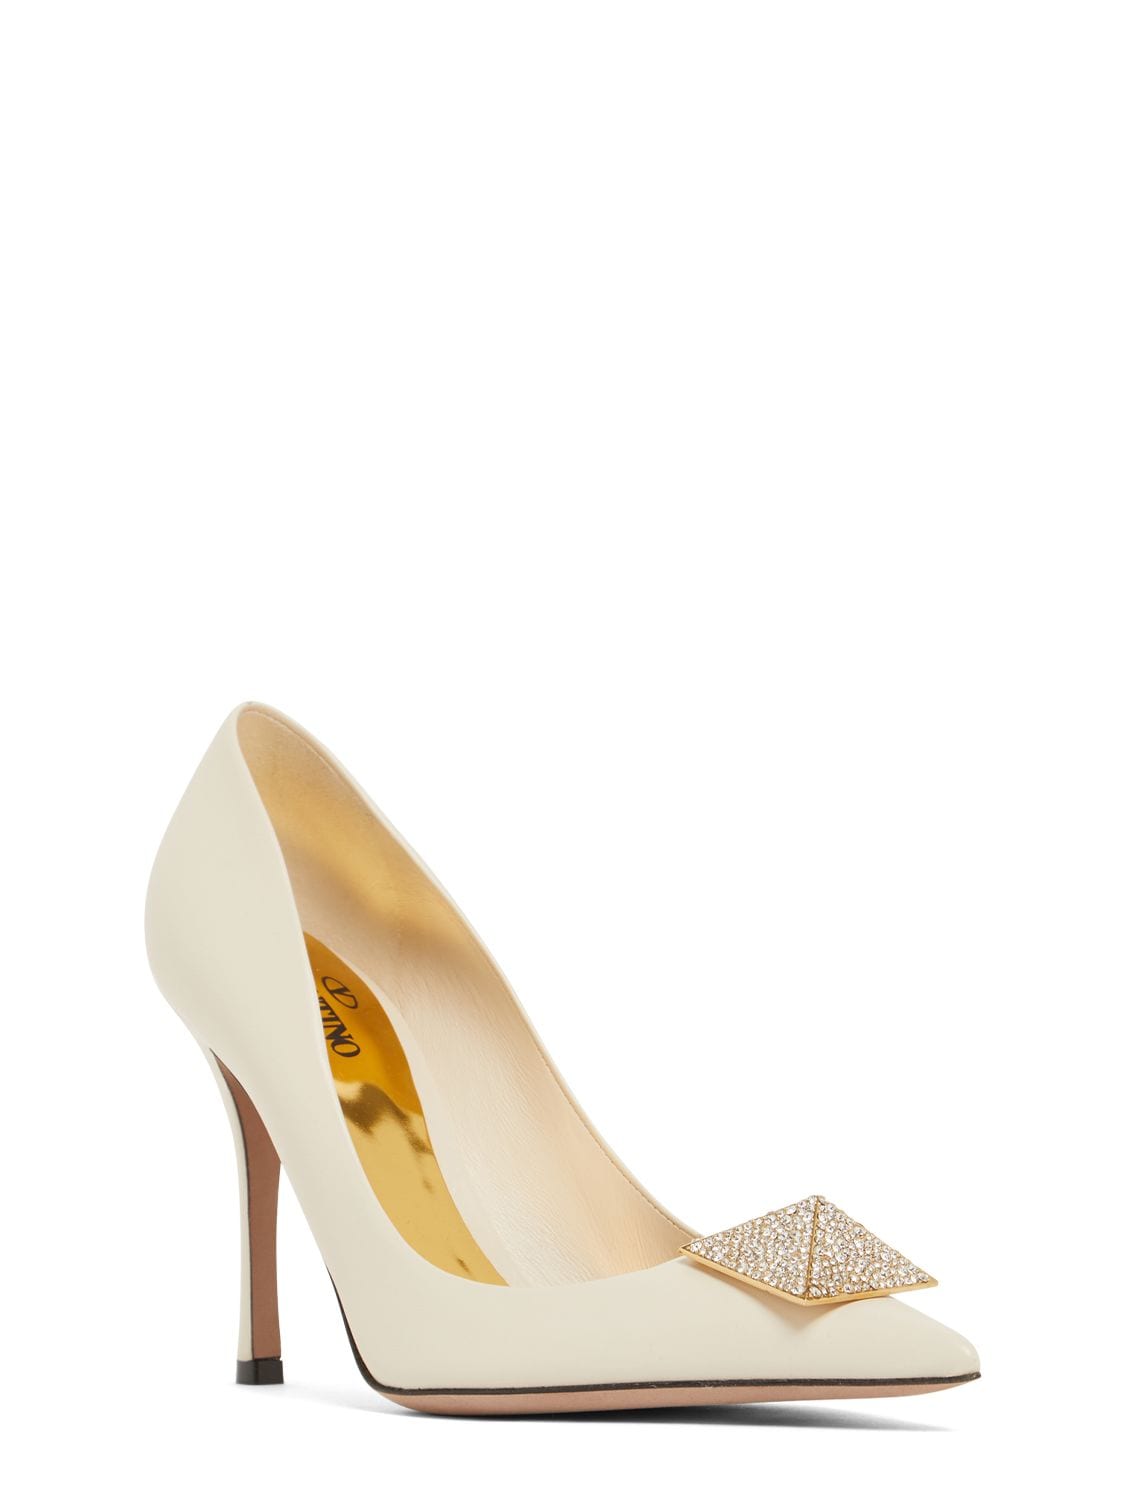 Shop Valentino 100mm One Stud Leather Pumps In Light Ivory